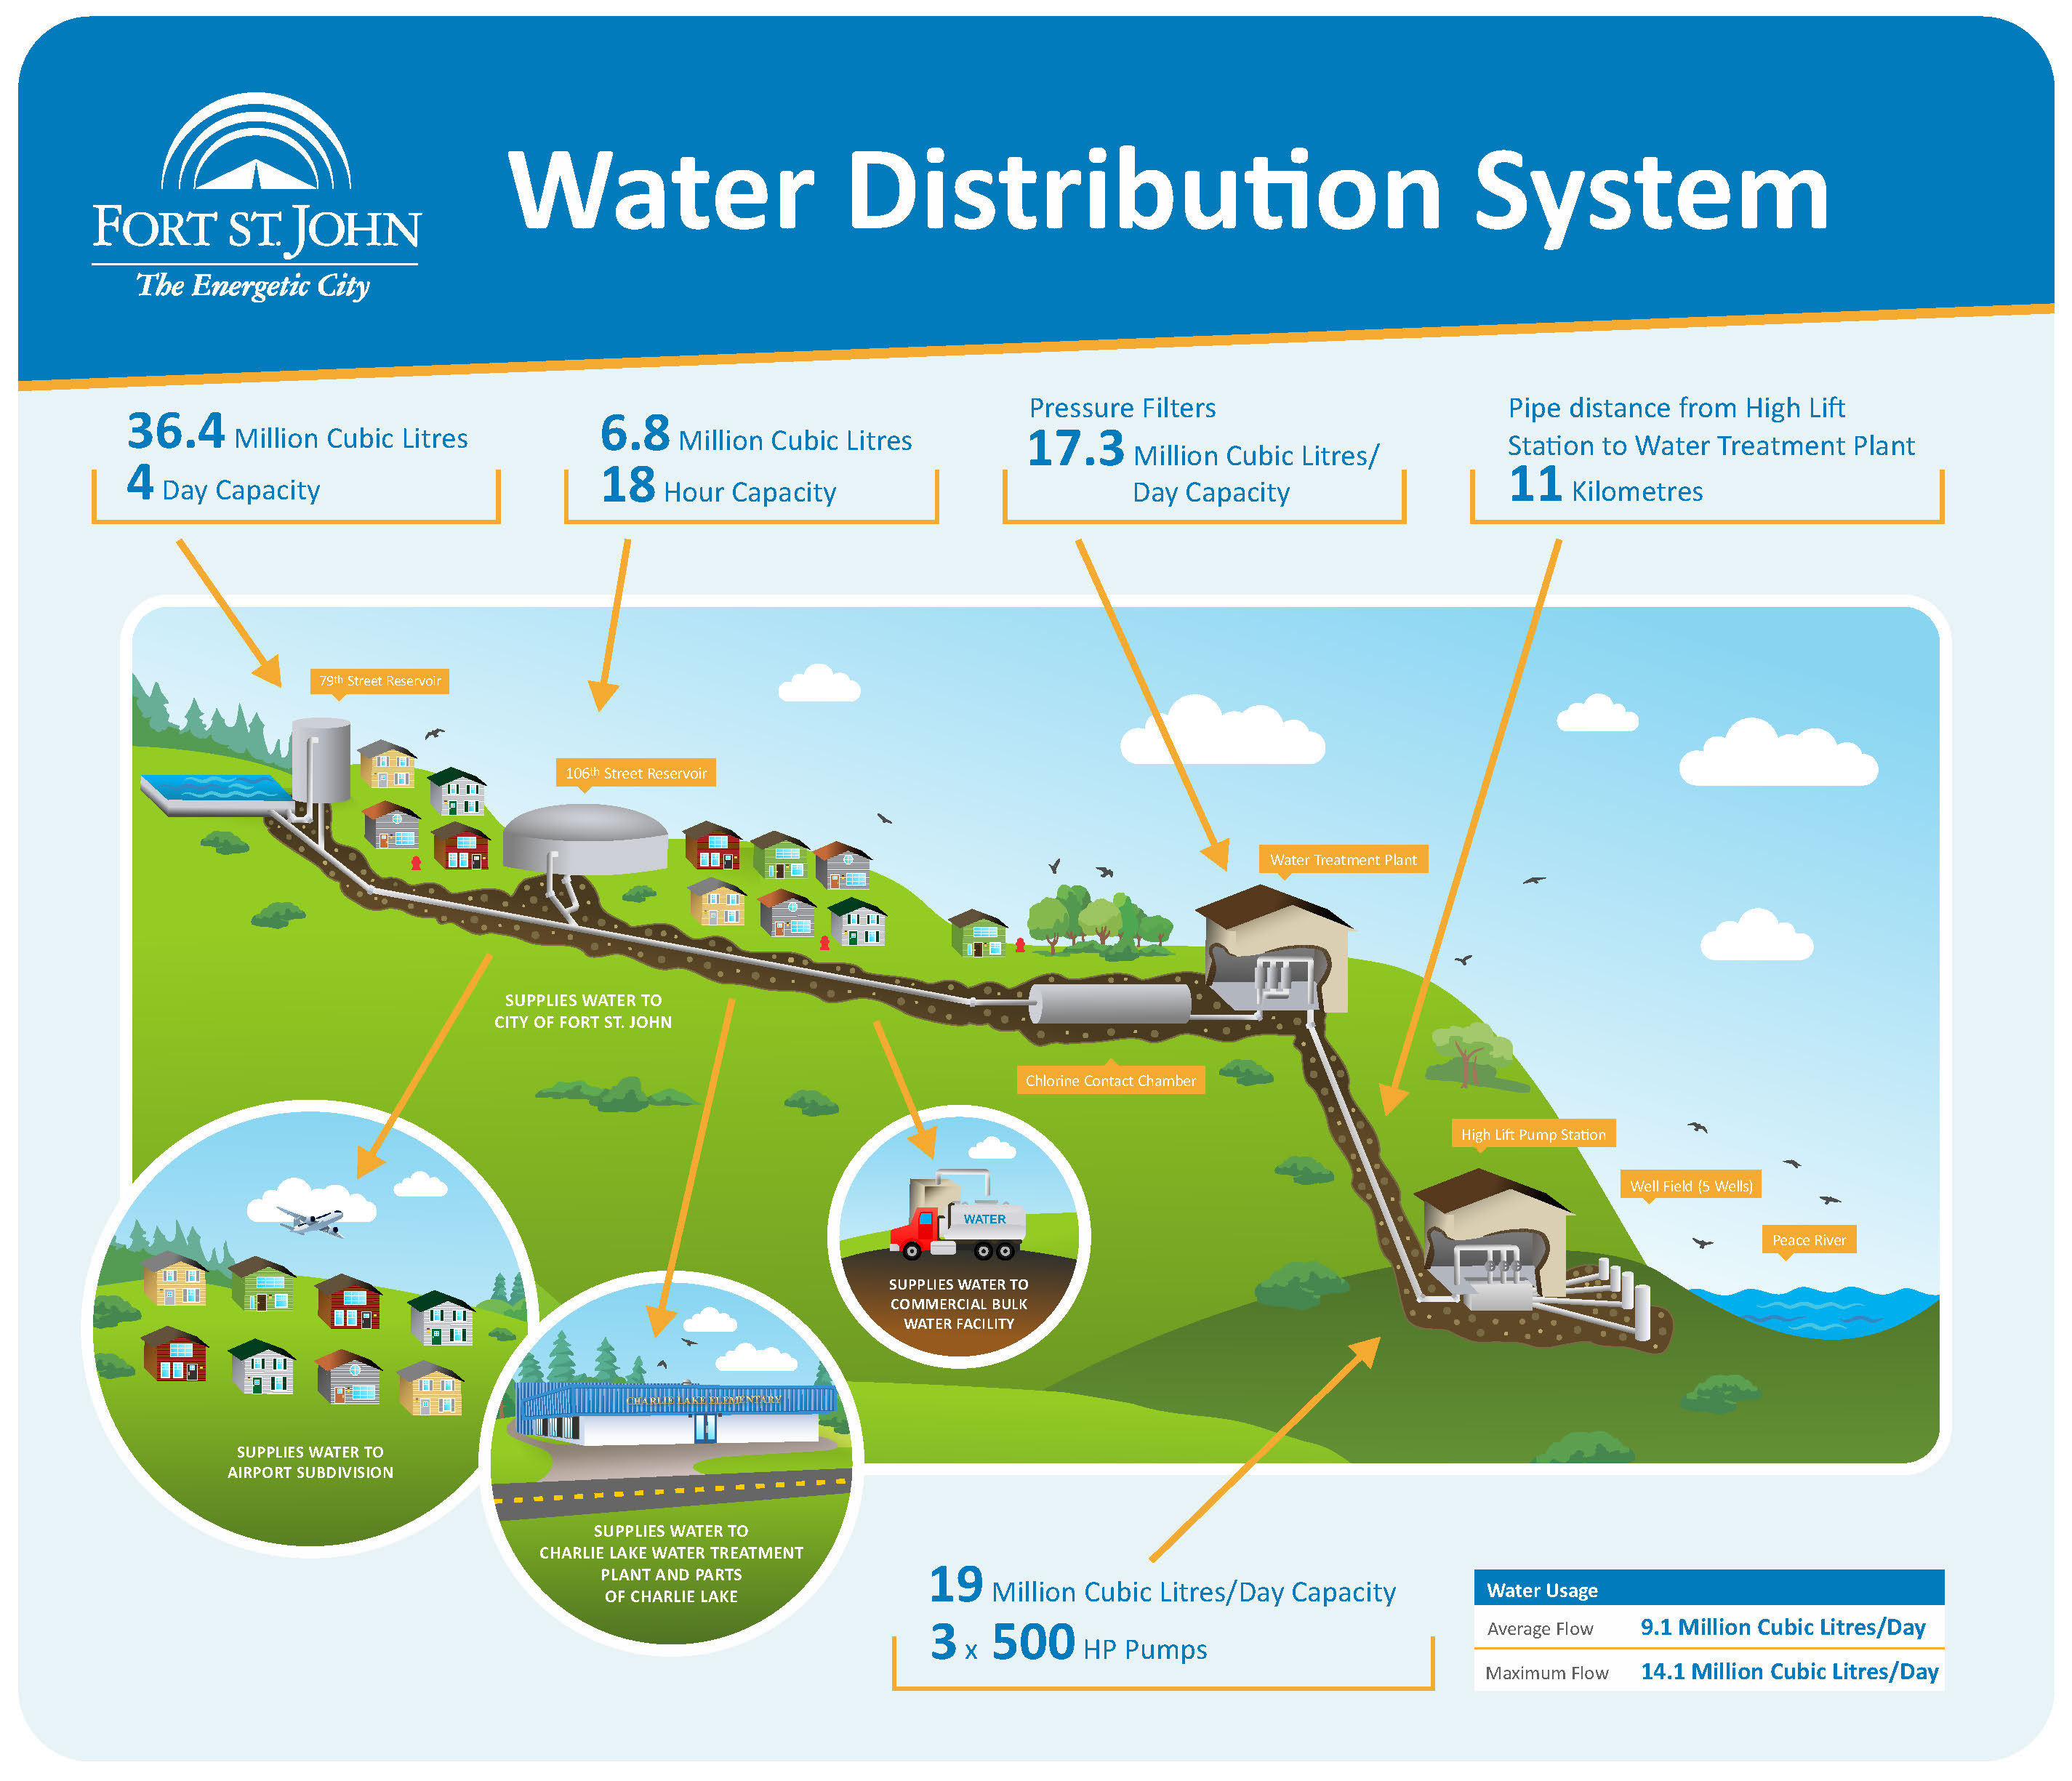 Water Distribution System Map